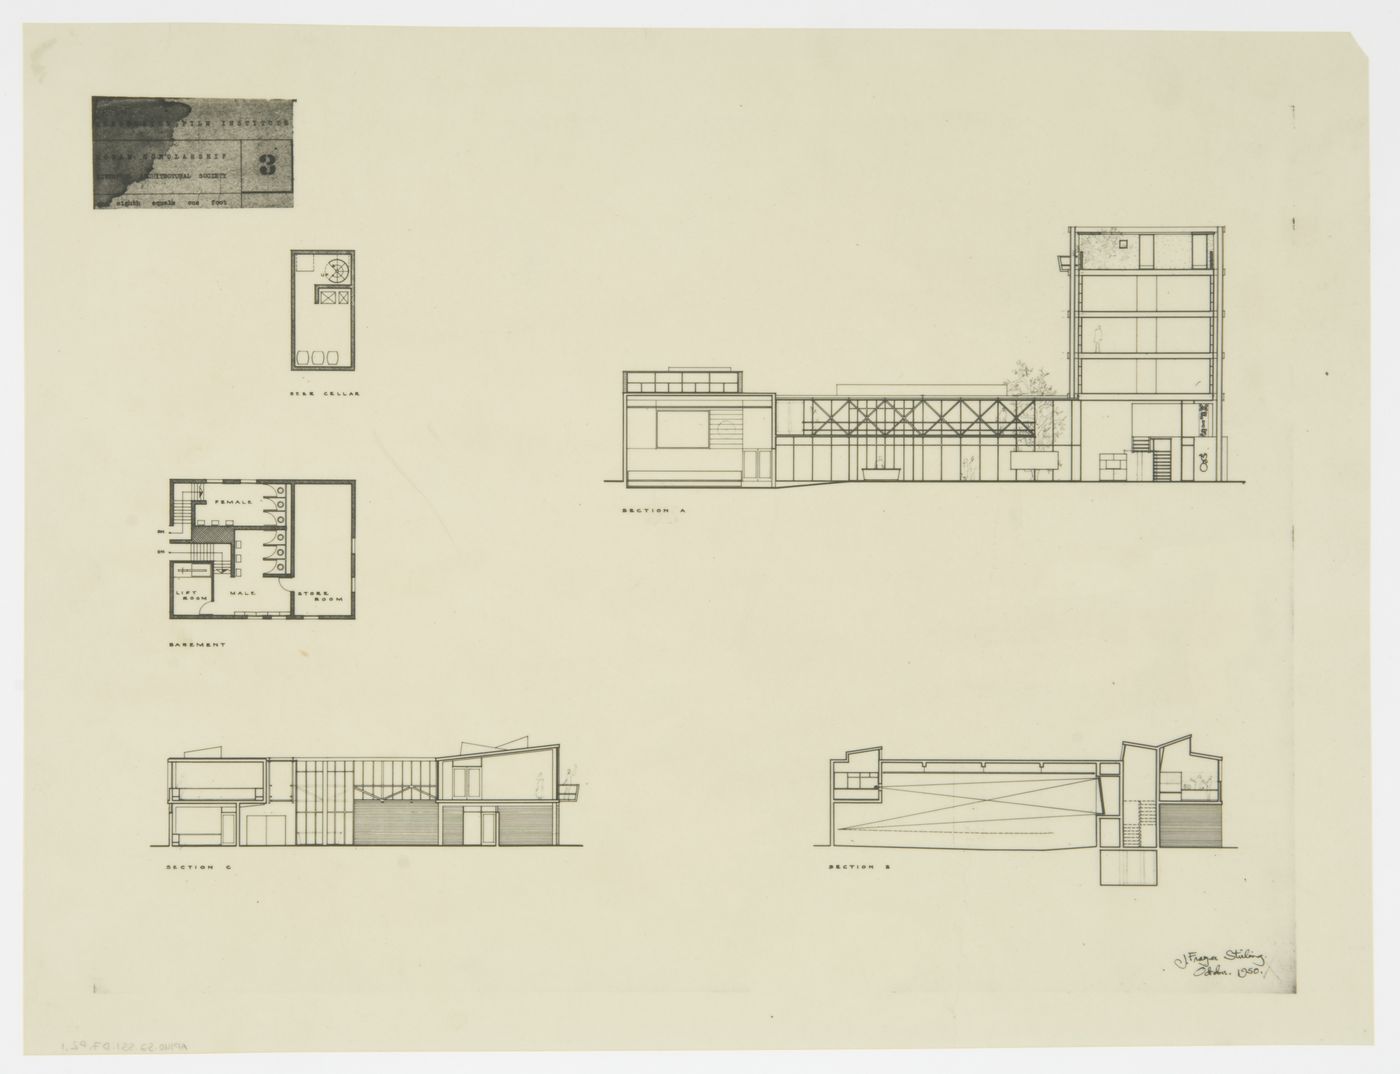 Merseyside Film Institute, Merseyside, England: plans and sections